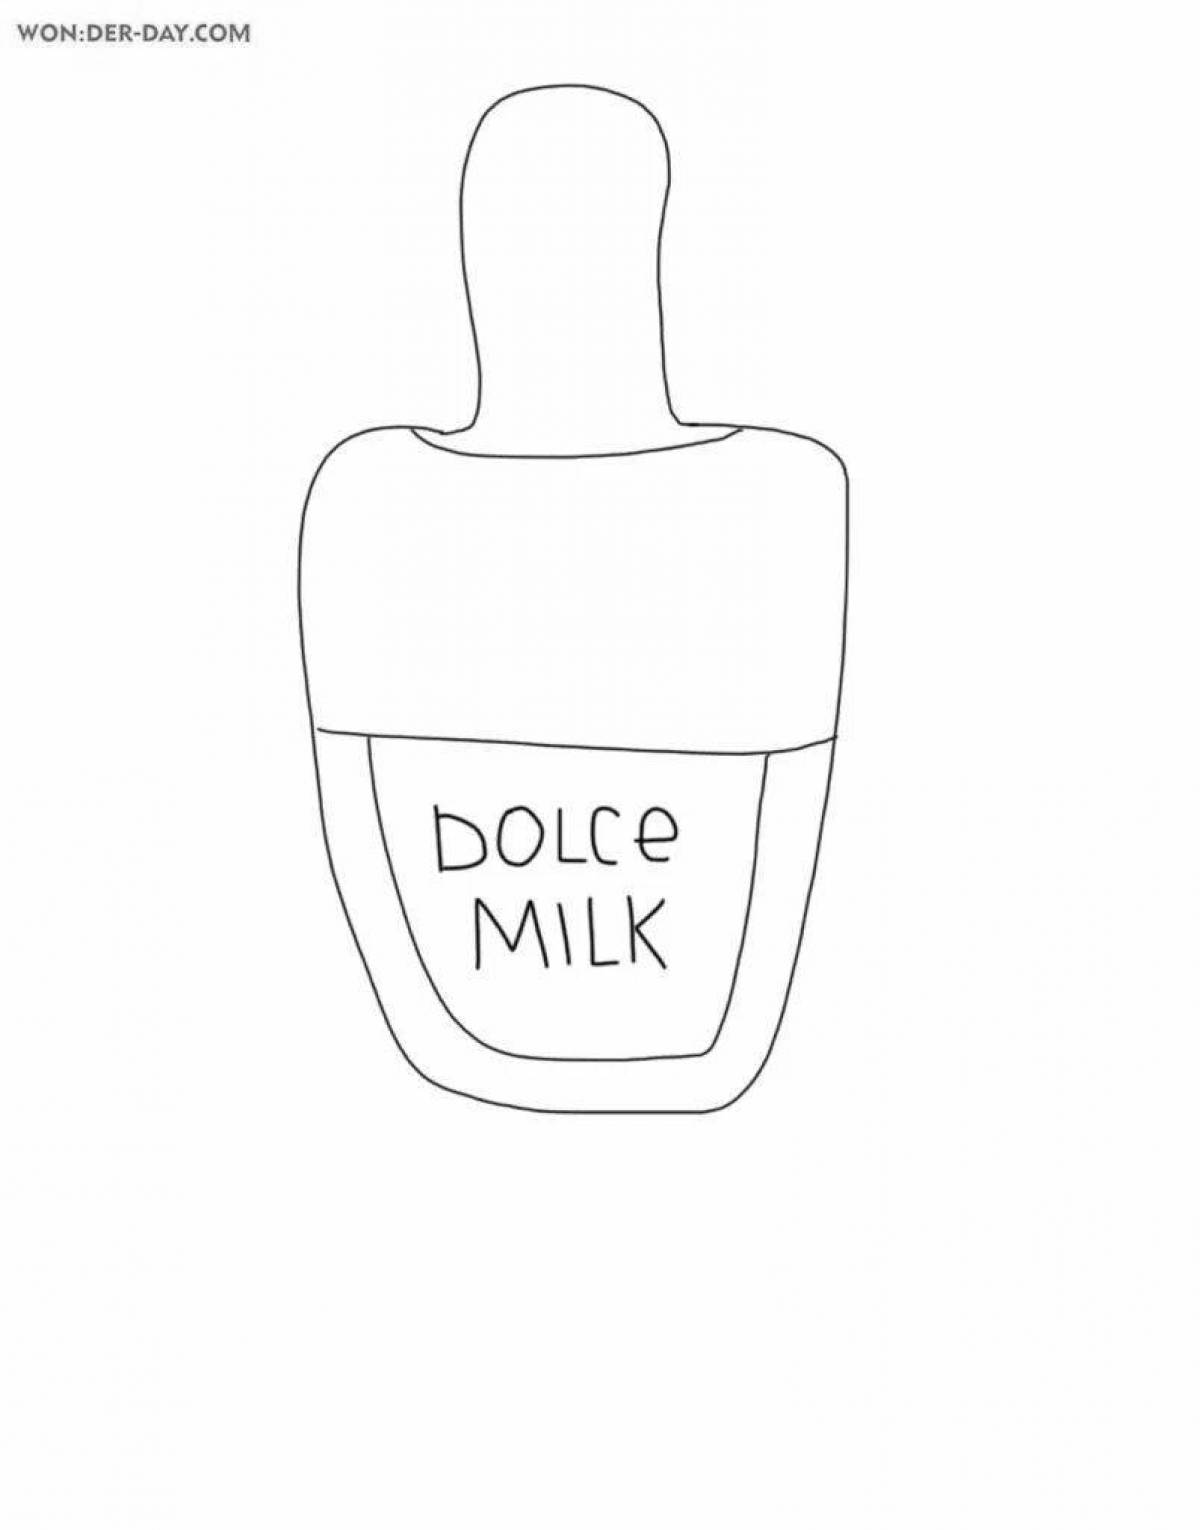 Adorable dolce milk cream coloring page